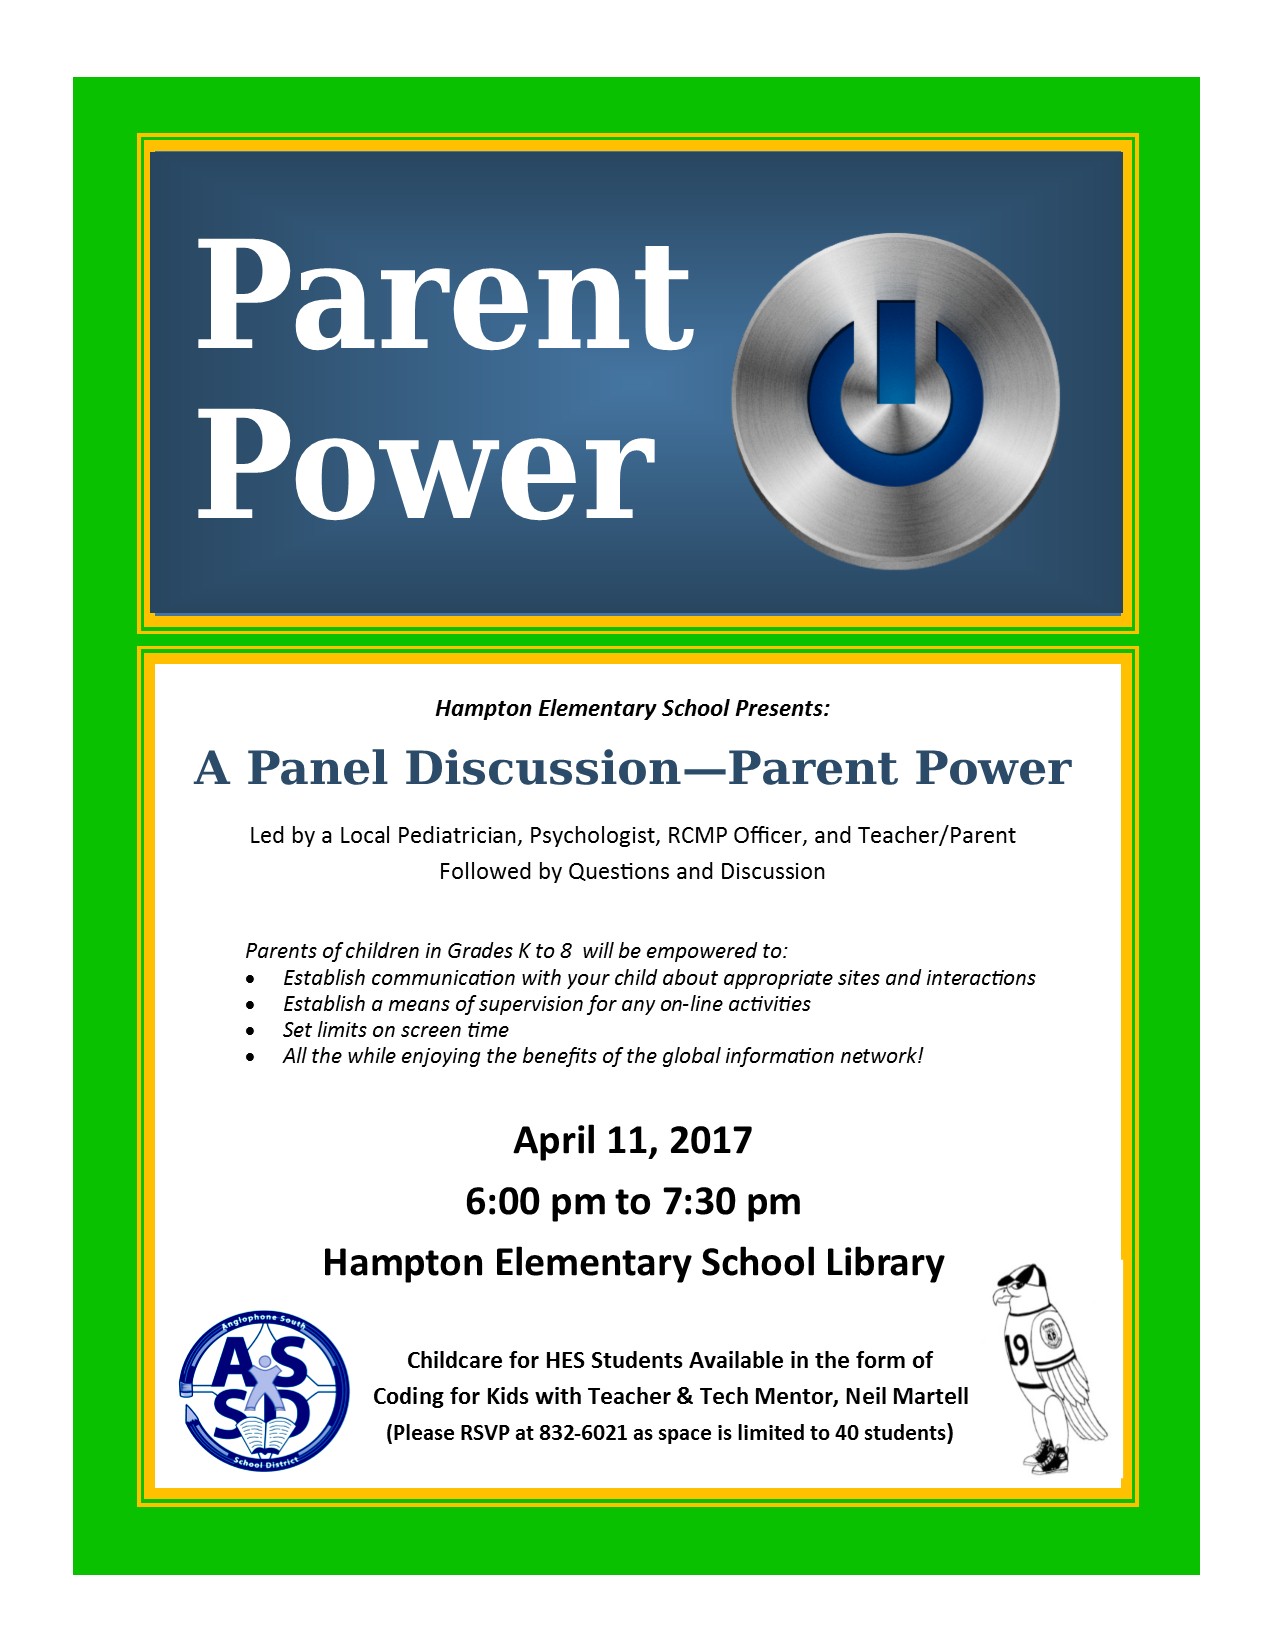 Parent Power Night Technology On Line safety panel discussion (2).jpg